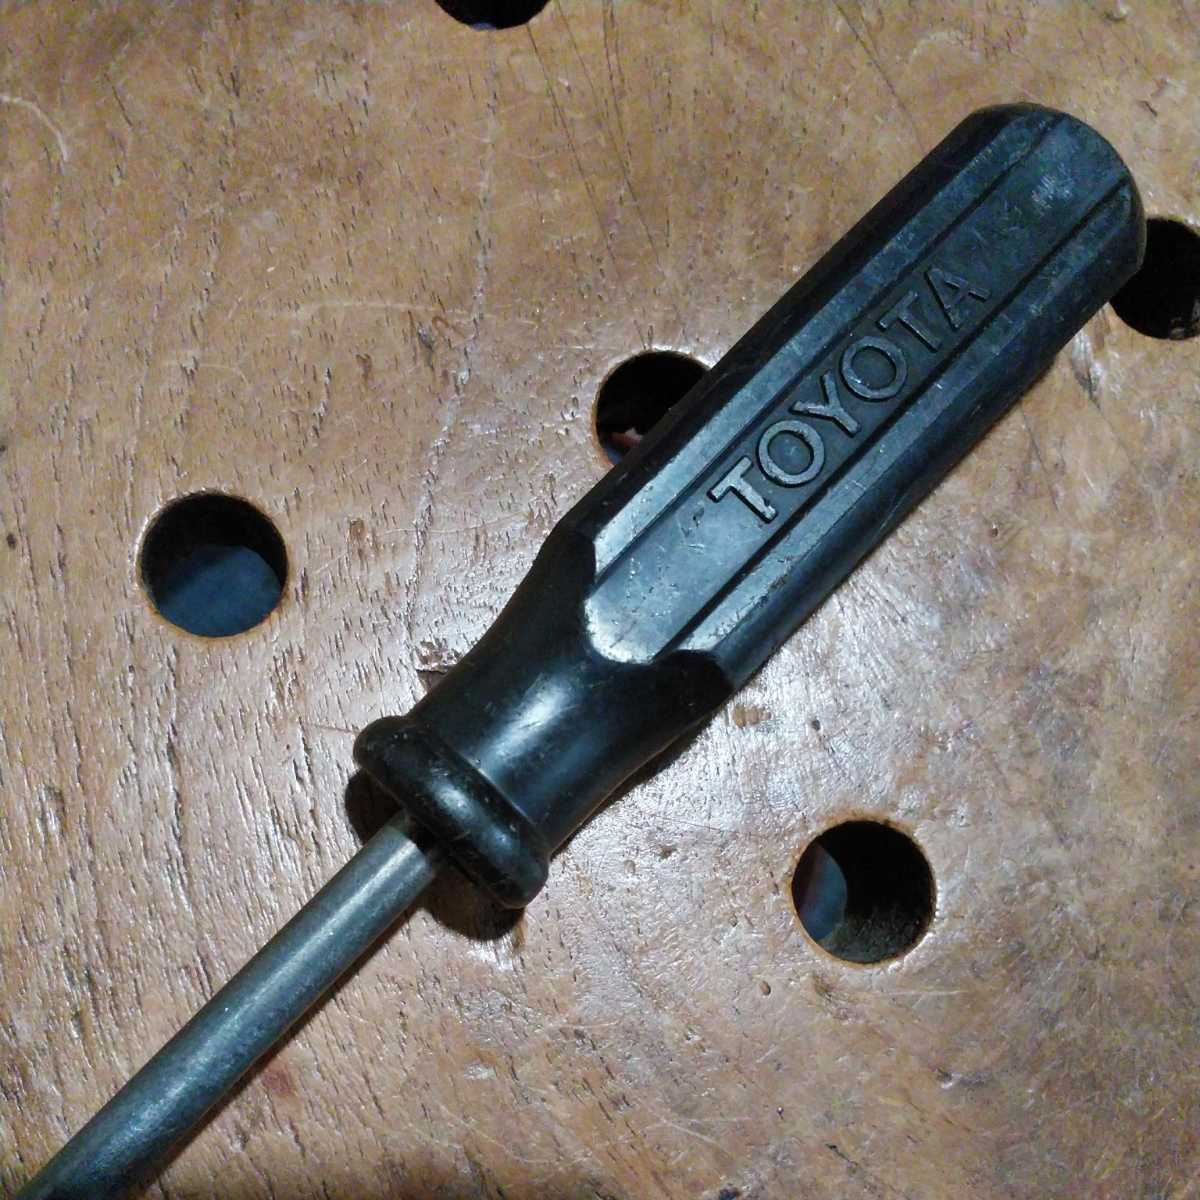  Toyota Motor original loaded tool Driver driver total length 140.0mm TOYOTA maintenance for tool pattern is 19.5mm. angle plus * minus pulling out difference . possibility 